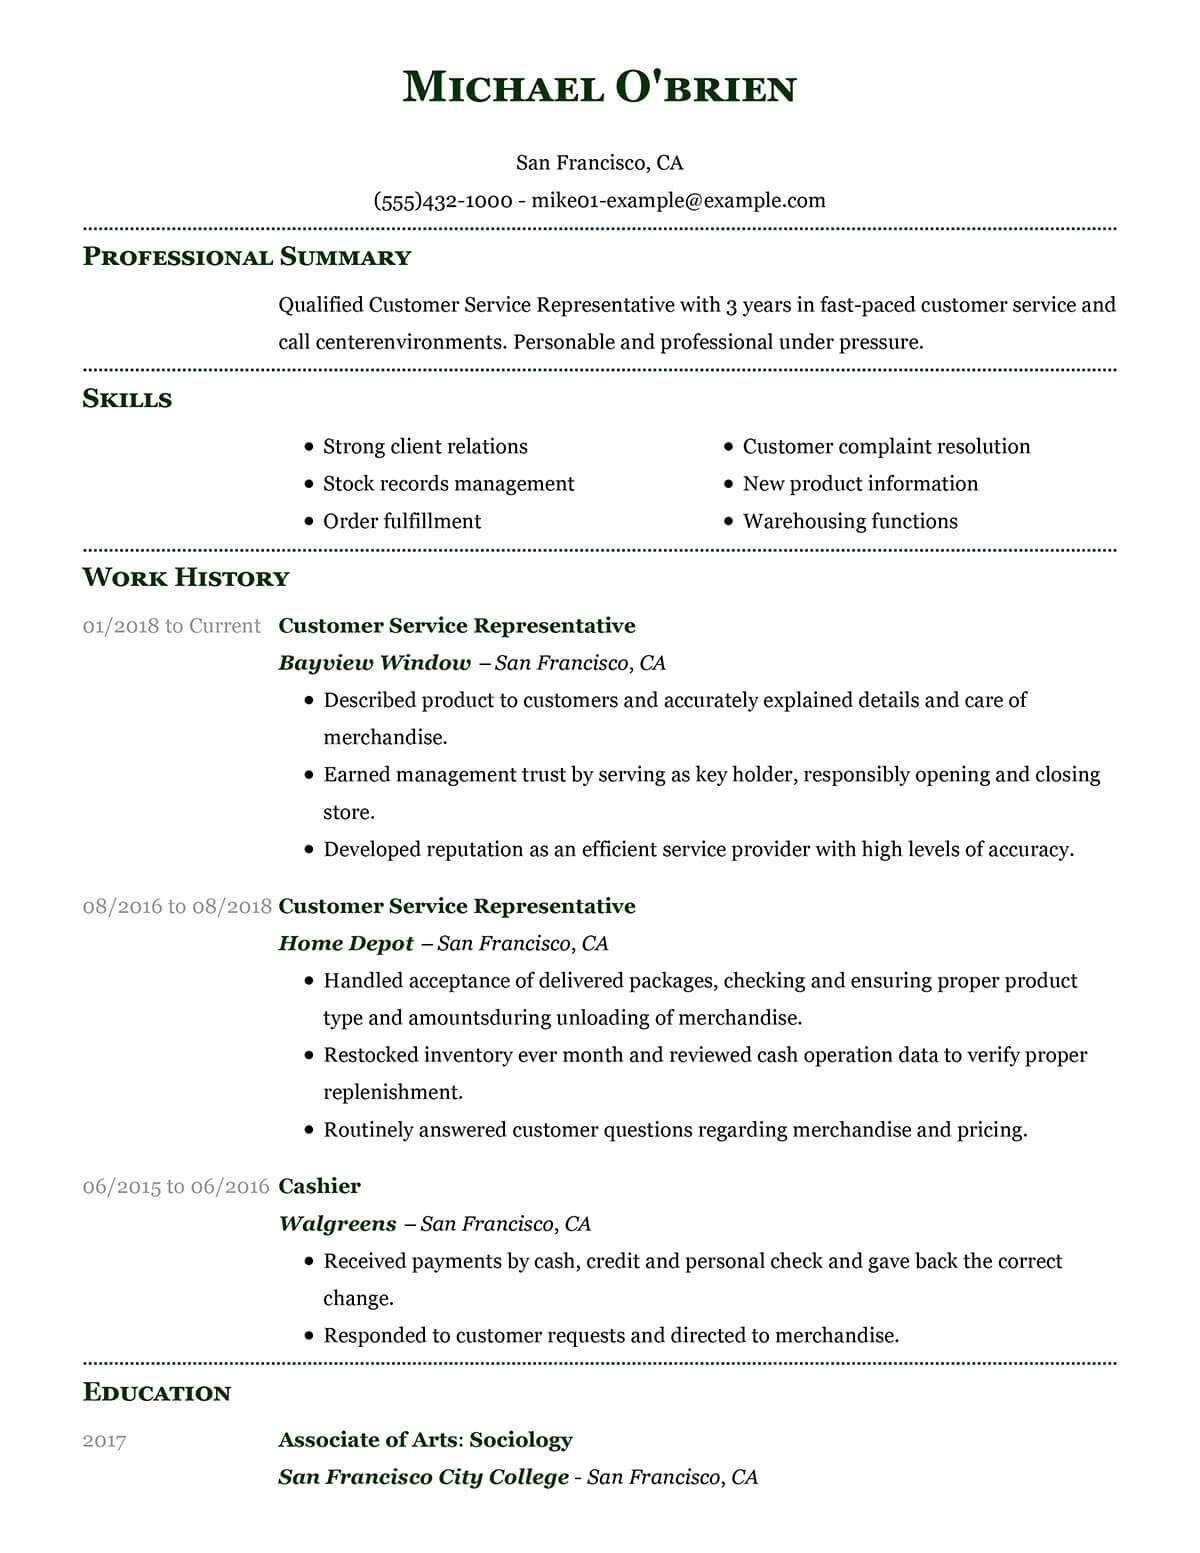 Customer Service Resume Skills Here Is A Customer Service Resume Example That Showcases Strong Use Of Action Words Skills To Match The Job Description And Certifications That Will Help customer service resume skills|wikiresume.com